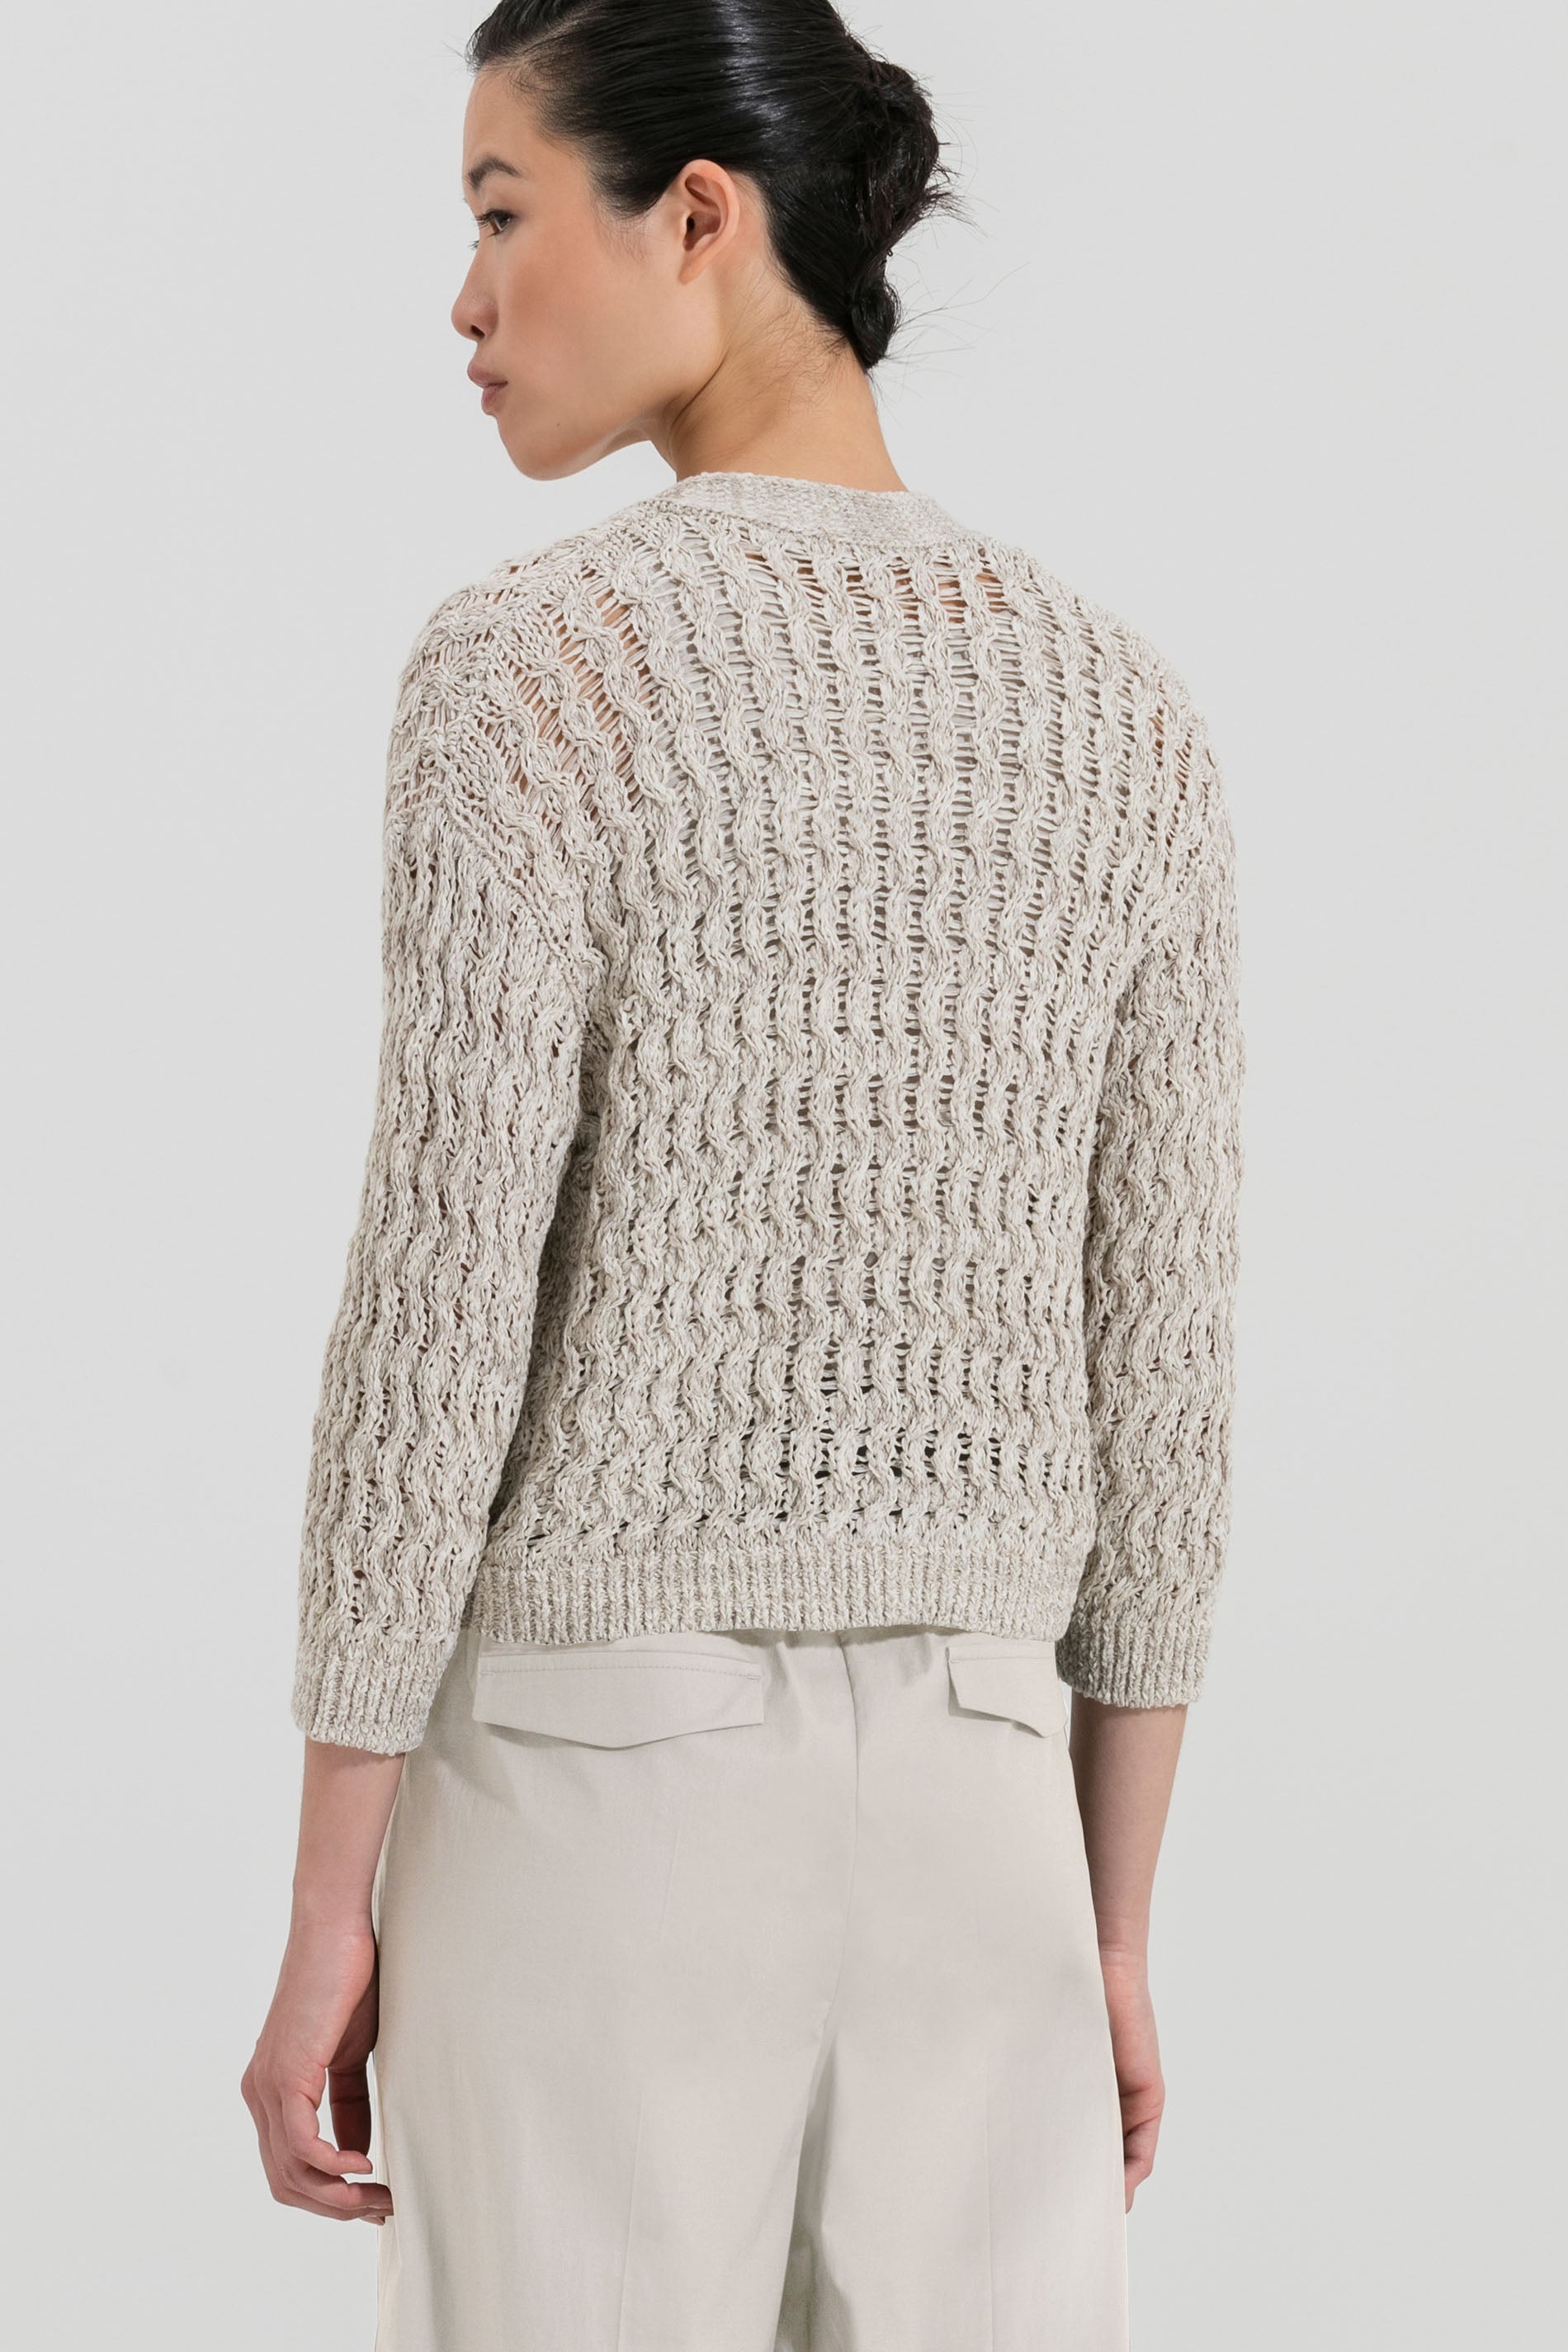 LUISA CERANO-OUTLET-SALE-Cardigan in Two-Tone-Optik-Strick-by-ARCHIVIST